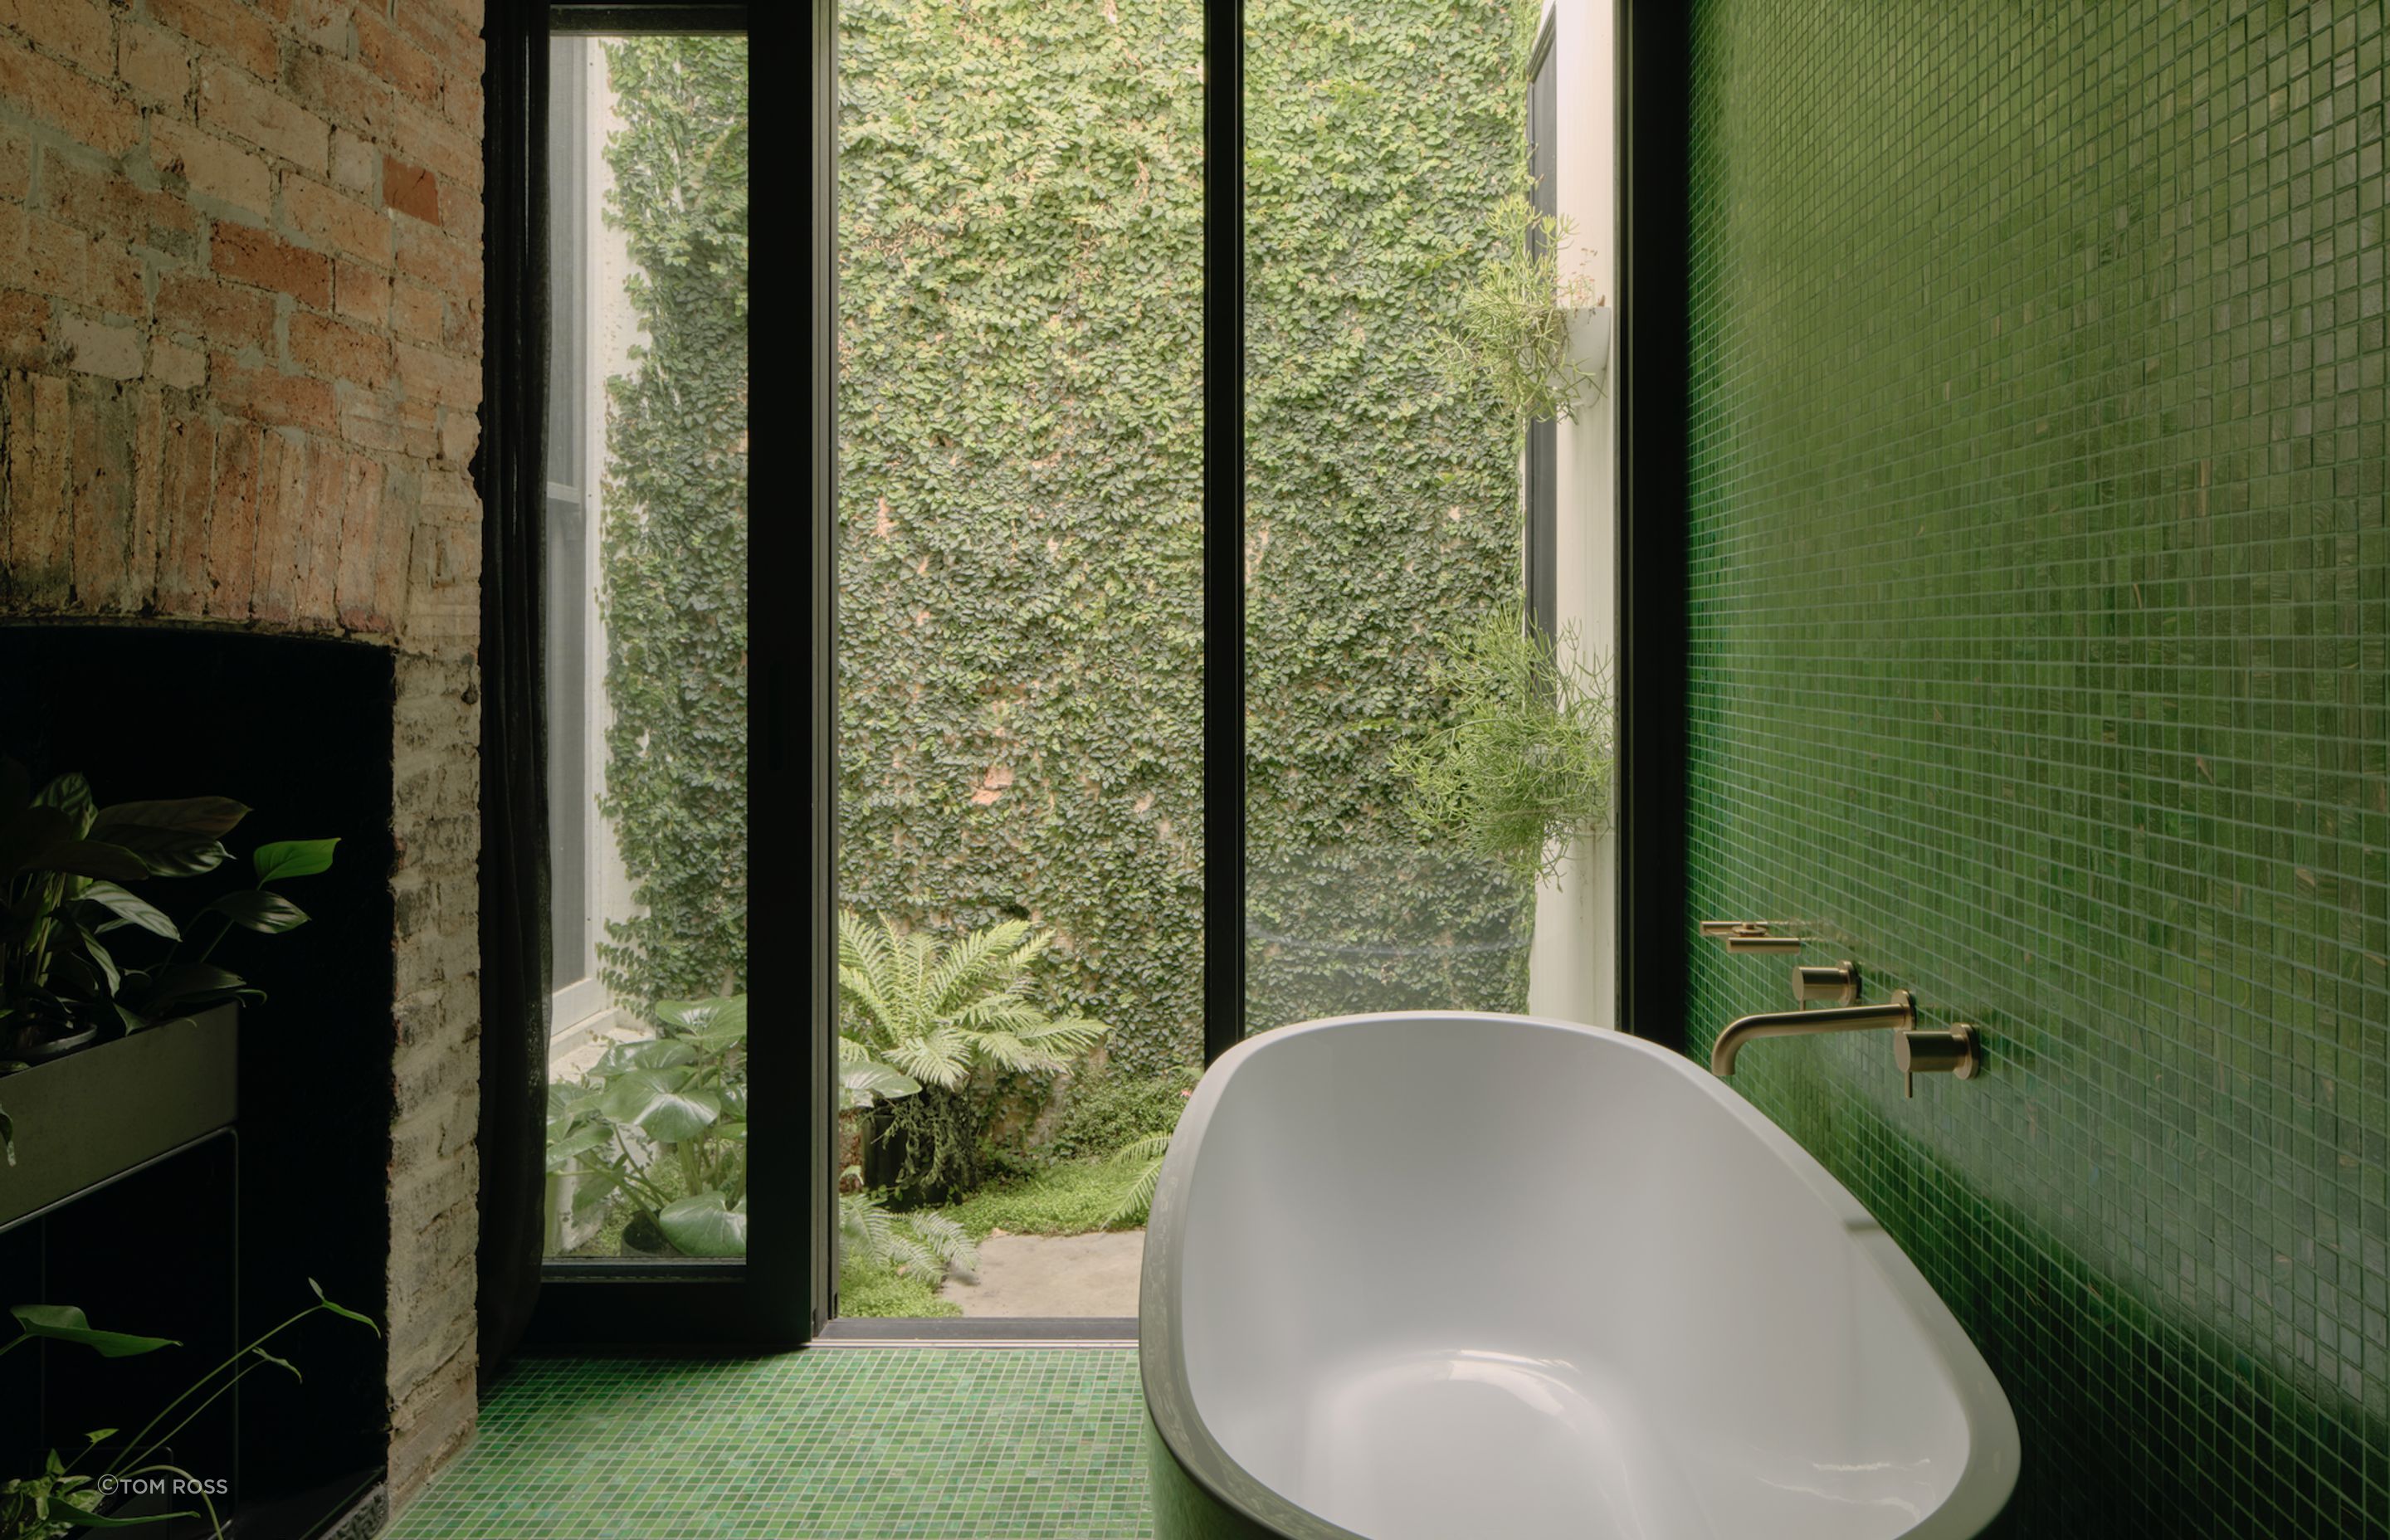 Tiling the walls in an eye-catching emerald hue, the space creates a bold statement.